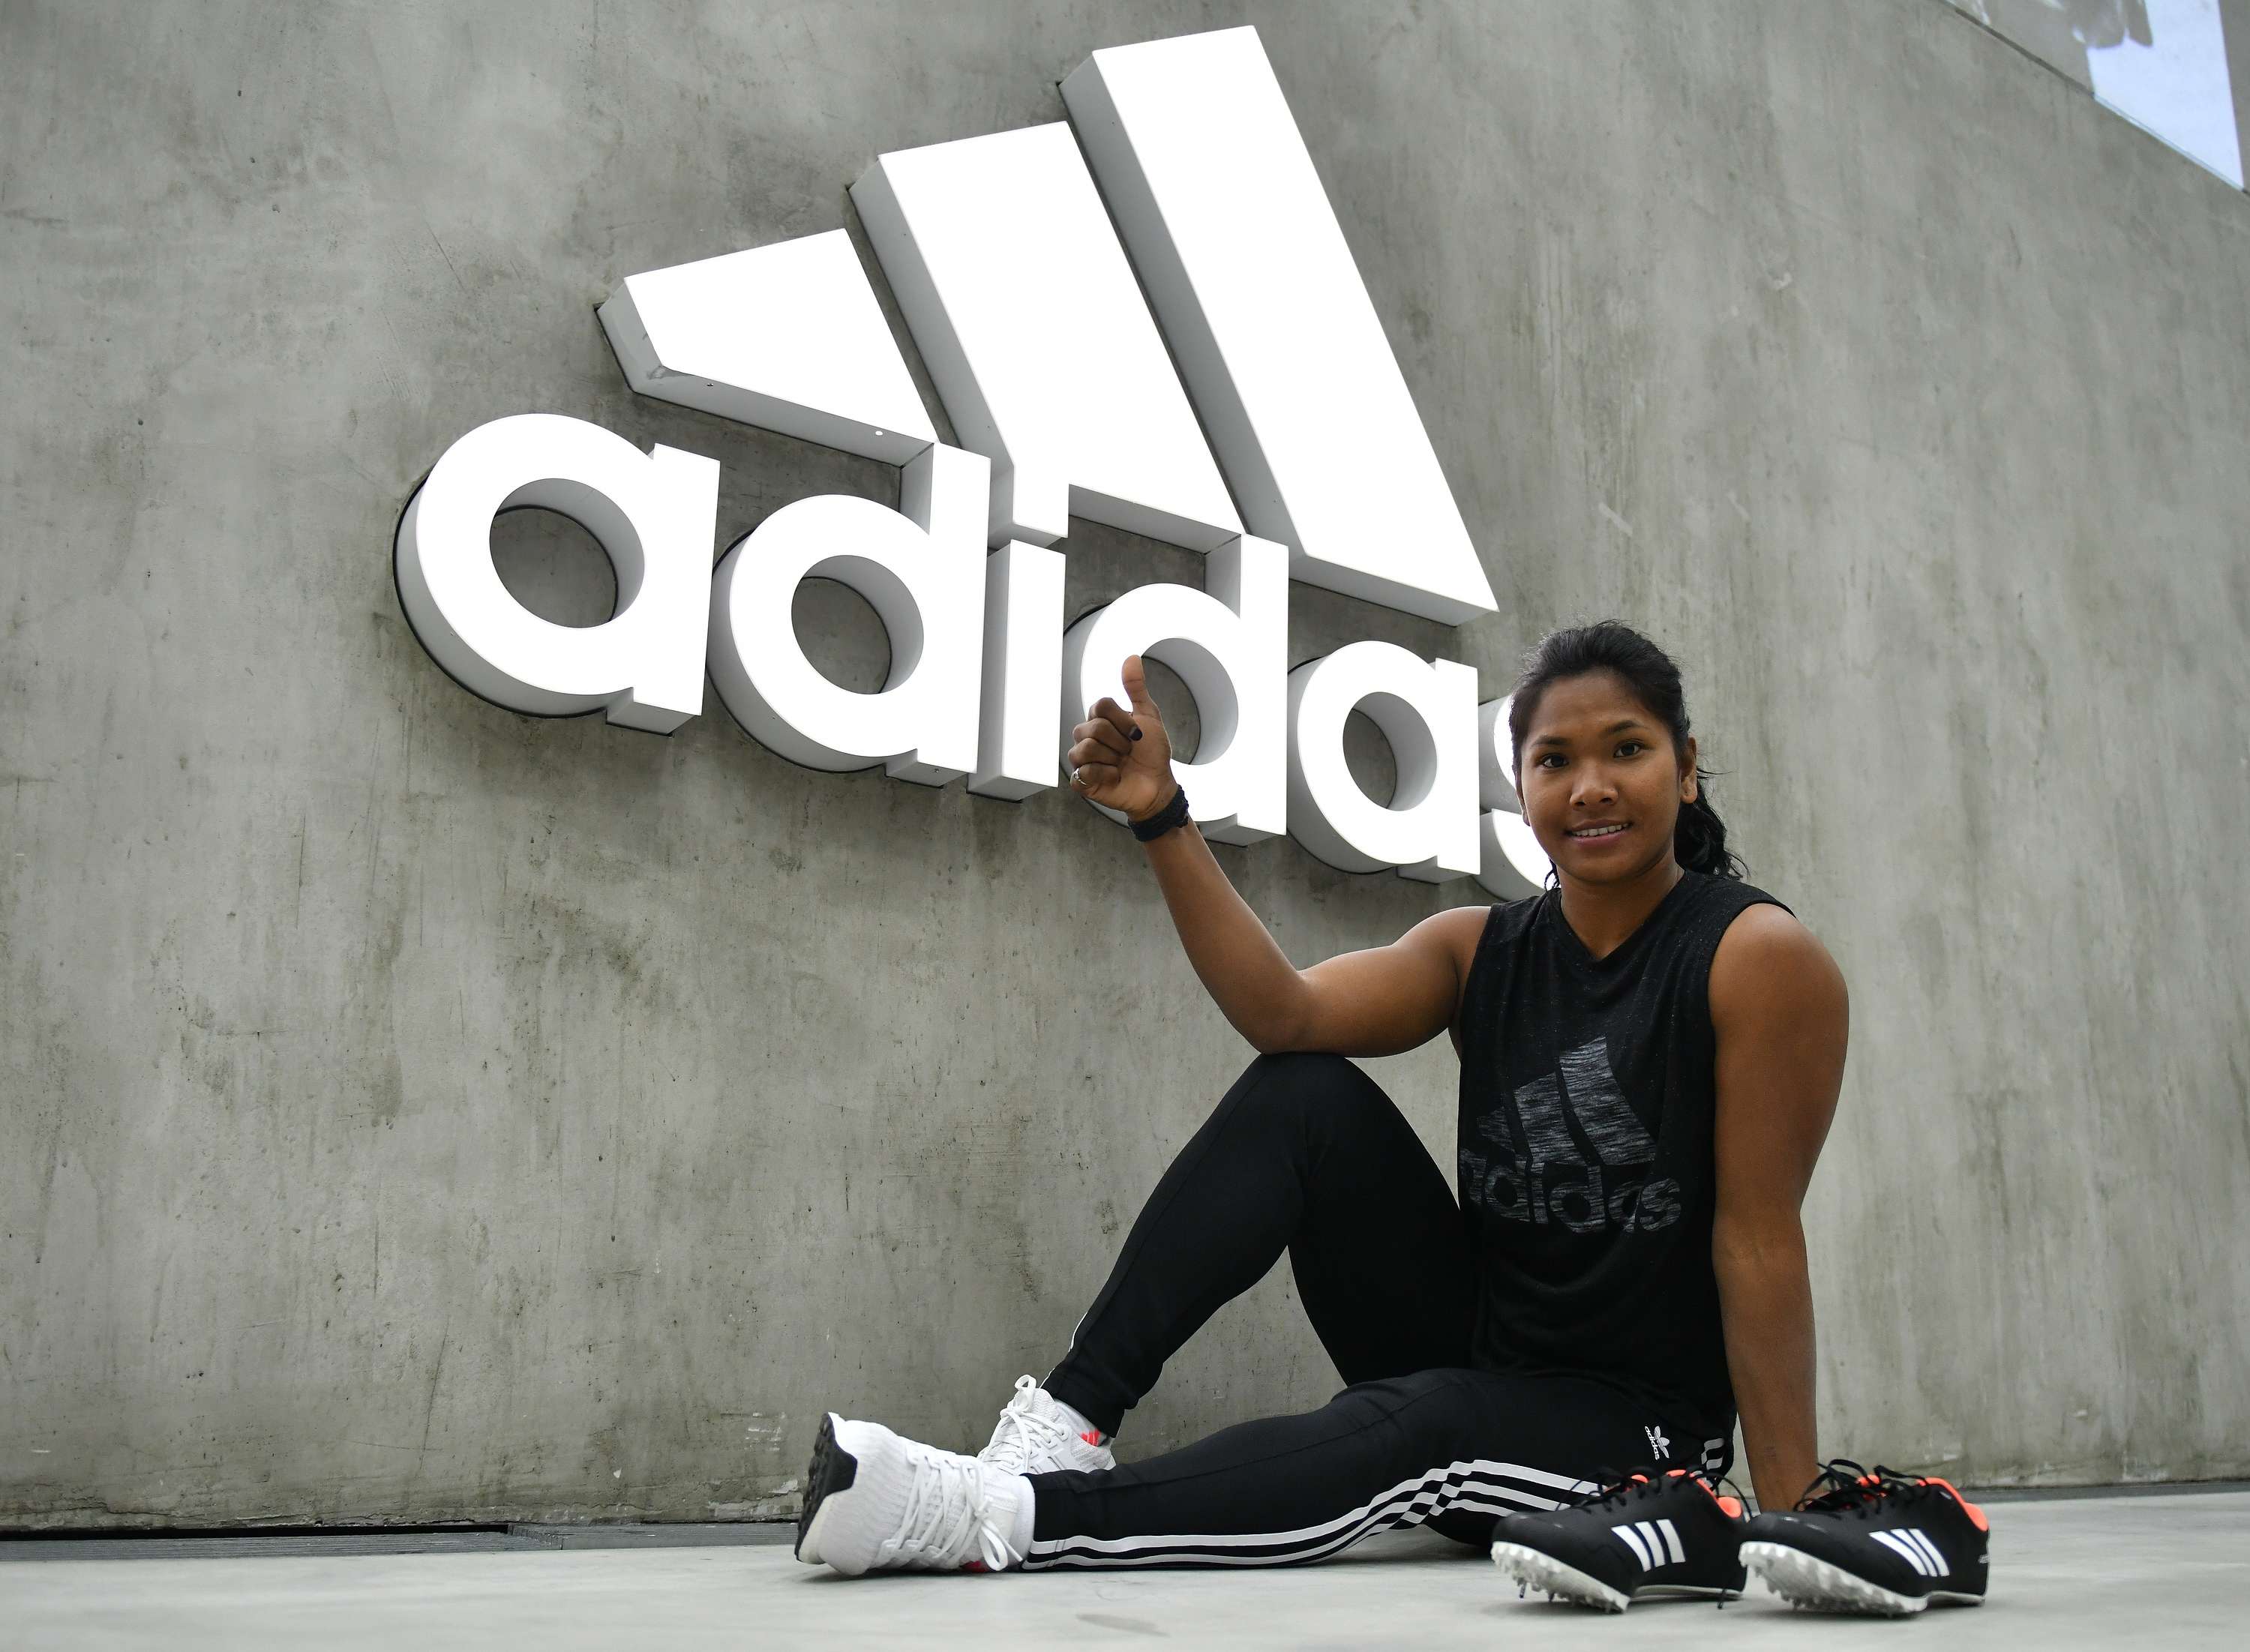 Indian Heptathlete Swapna Burman becomes the newest member of the adidas BrandEquity